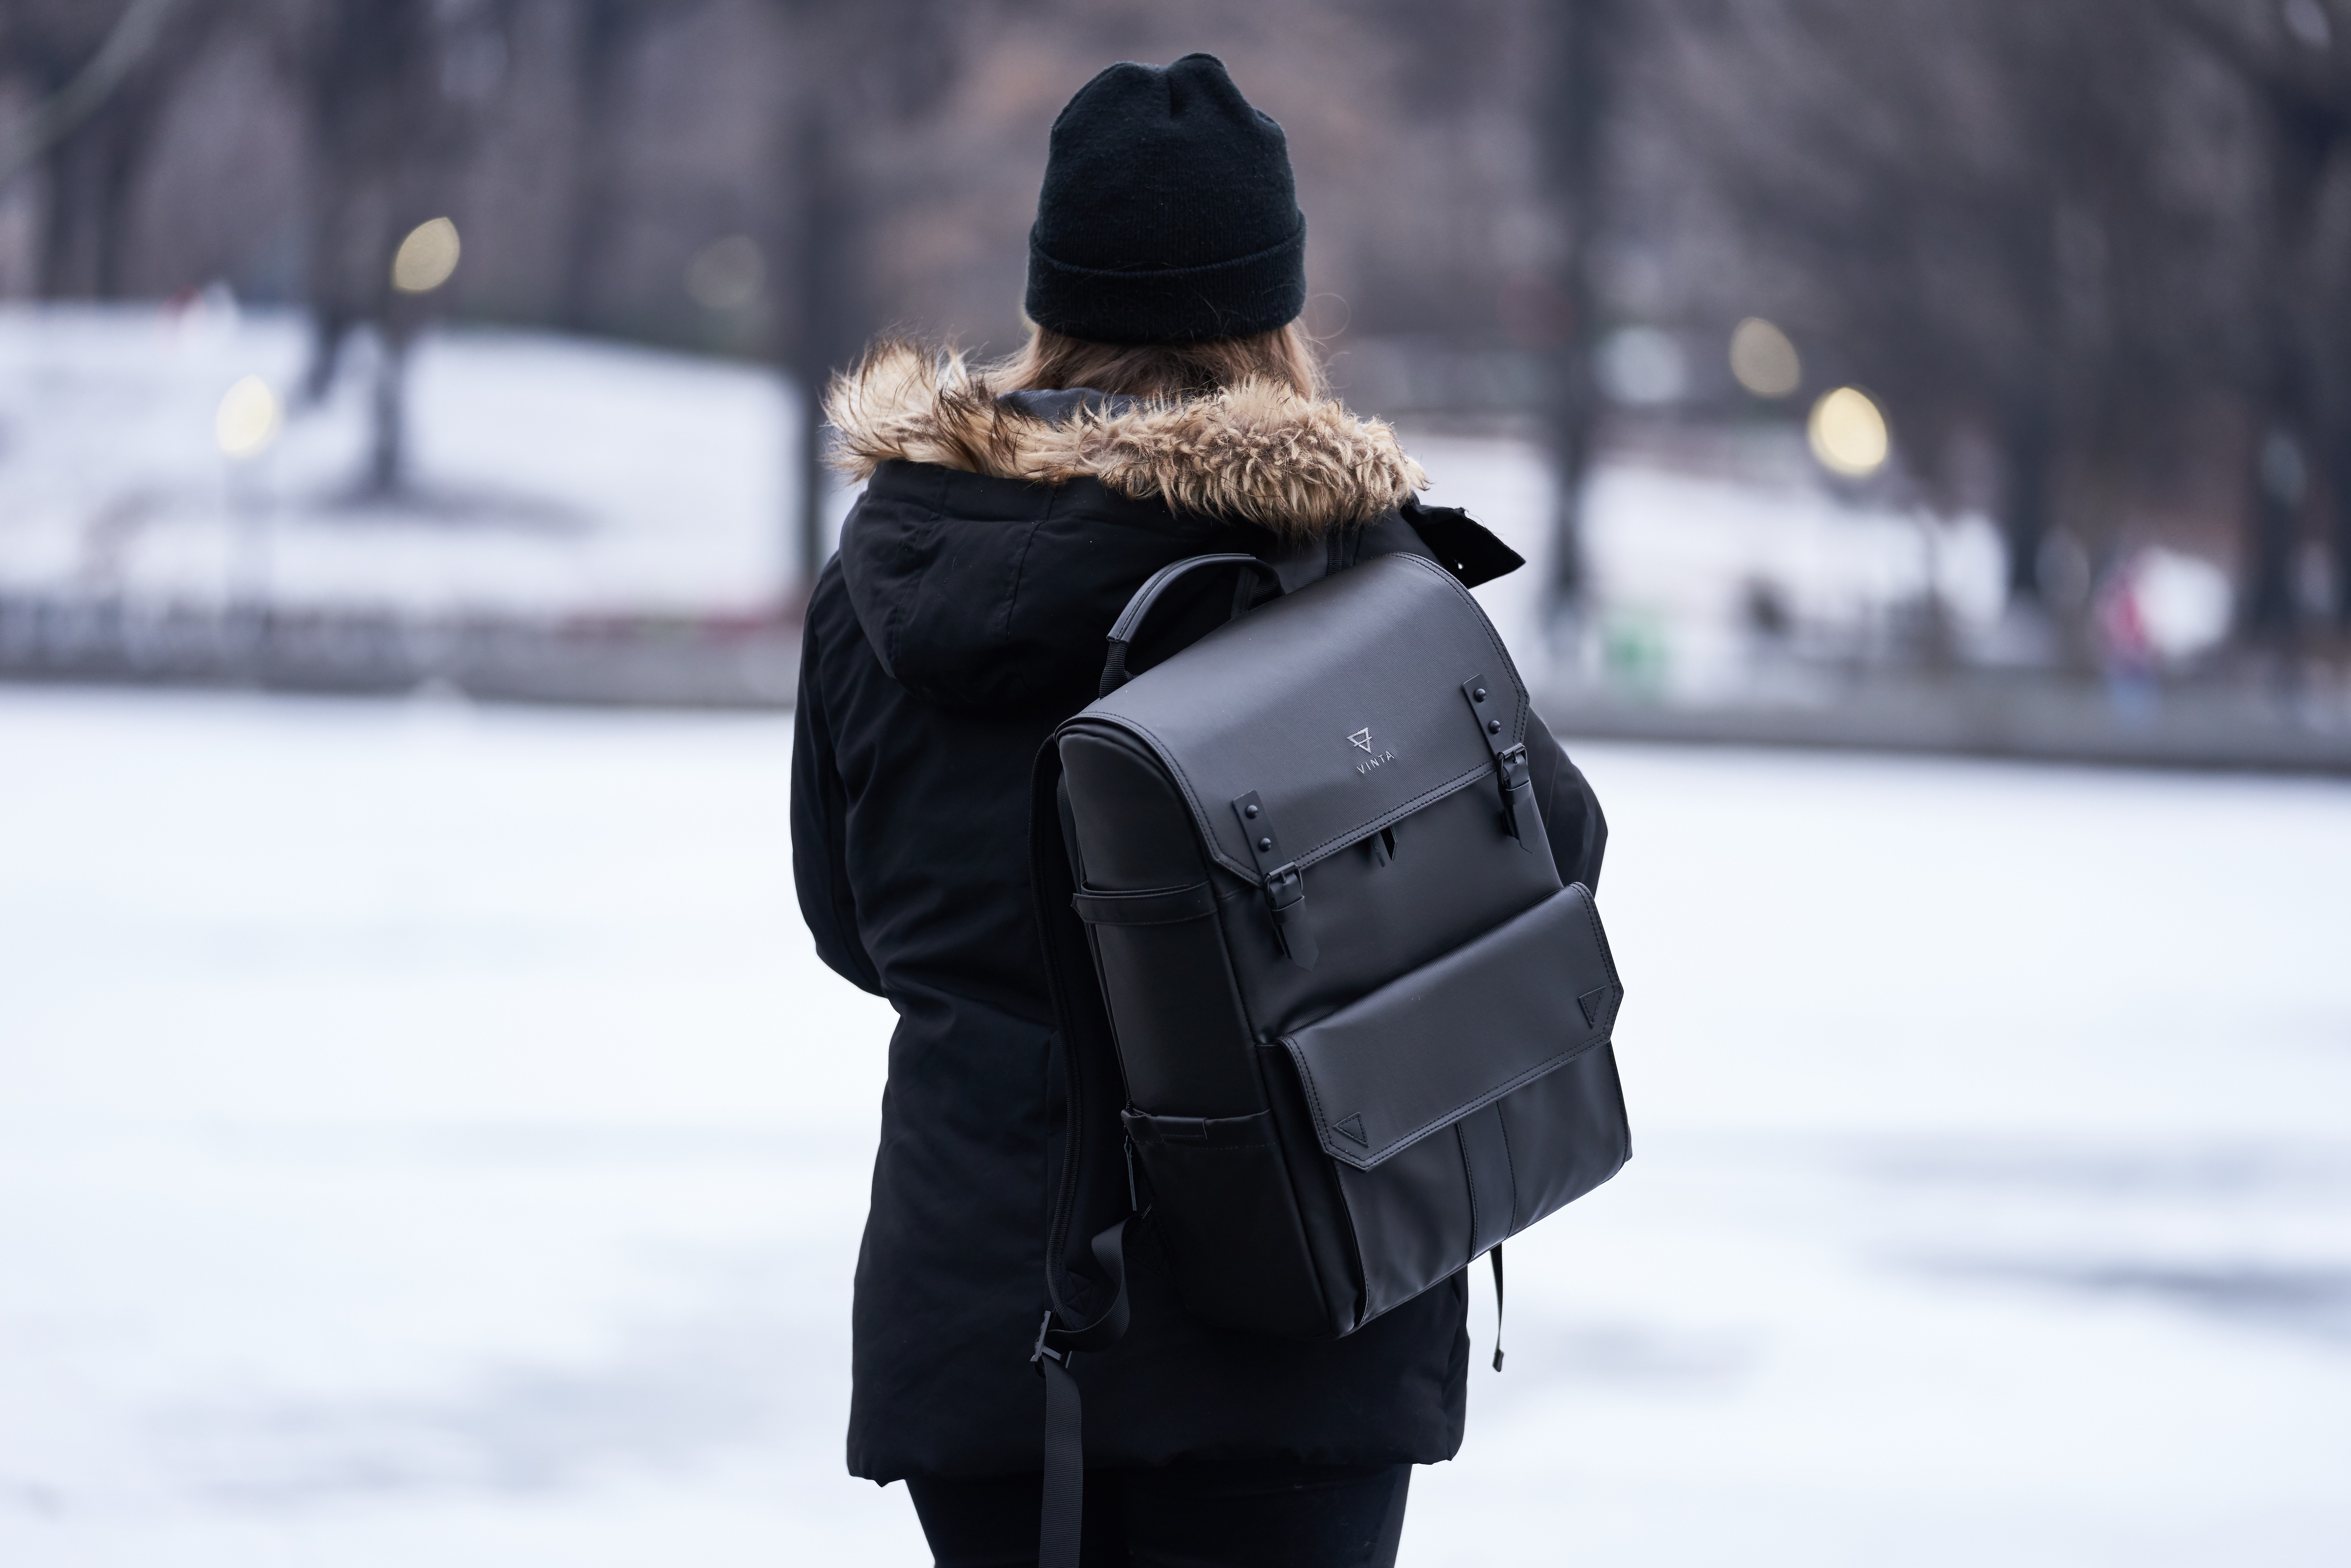 Woman wearing parka and carrying backpack during winter photo